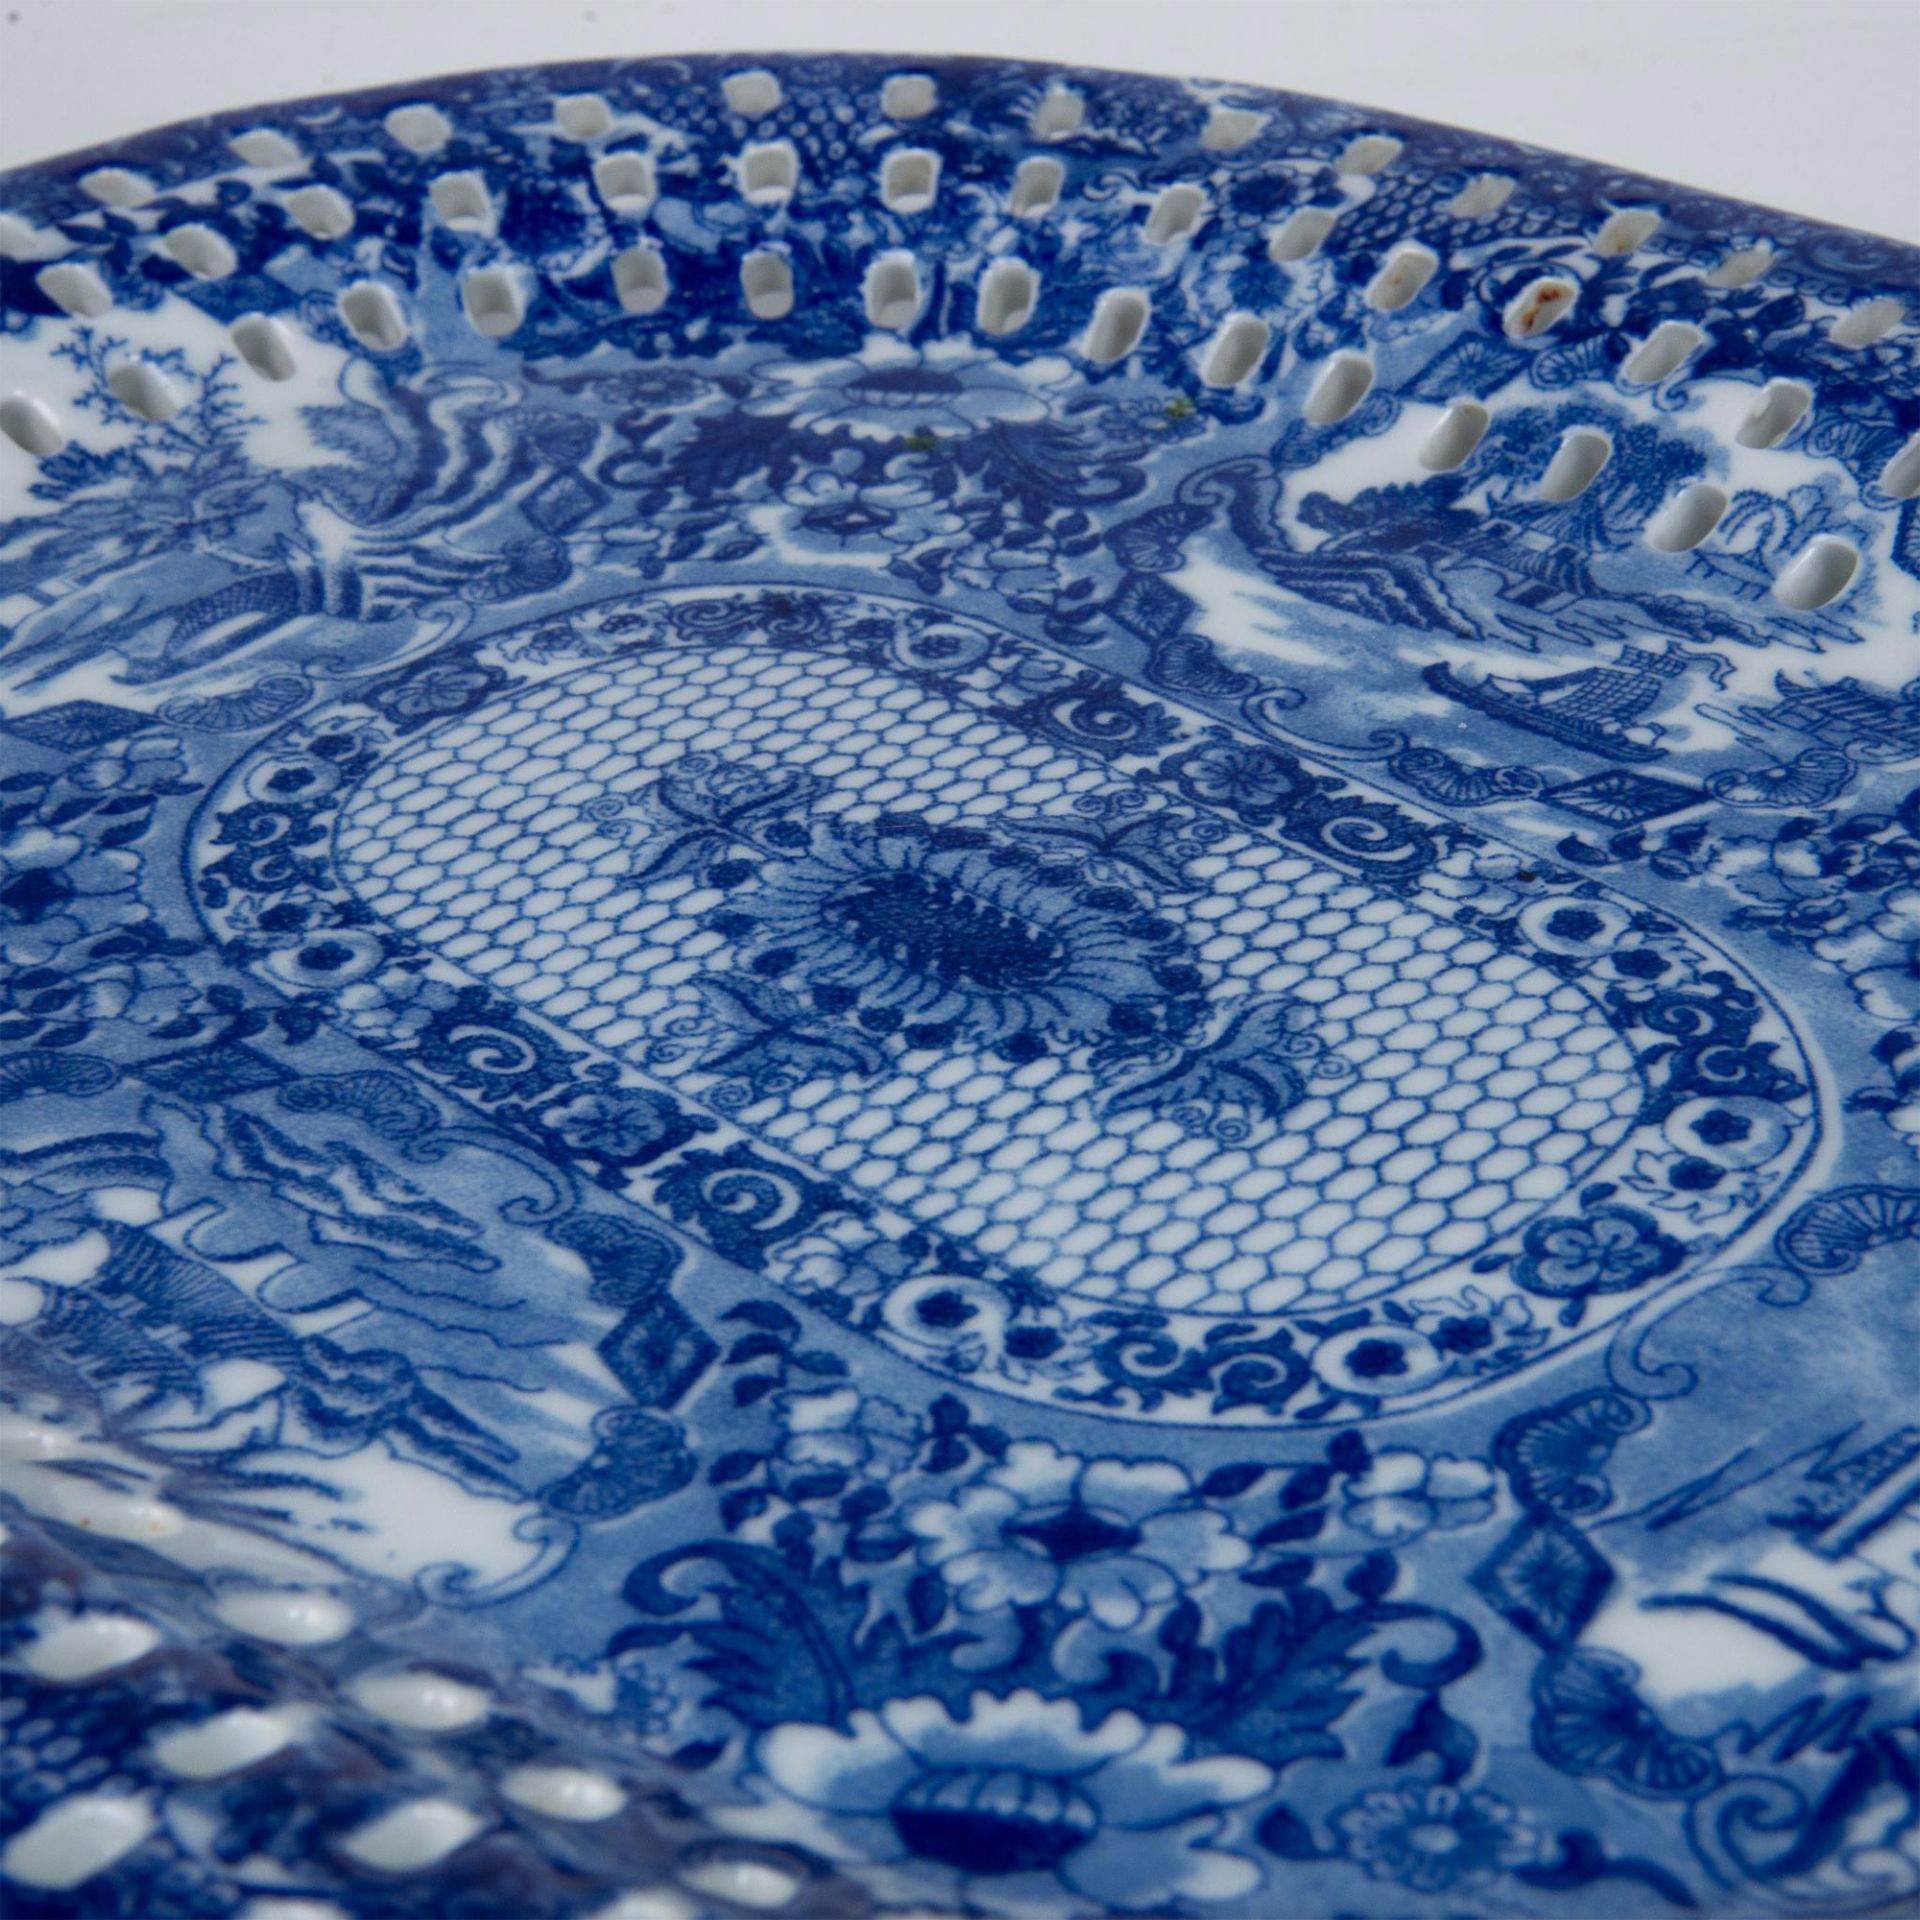 Victoria Ware Ironstone Blue and White Platter - Image 2 of 4